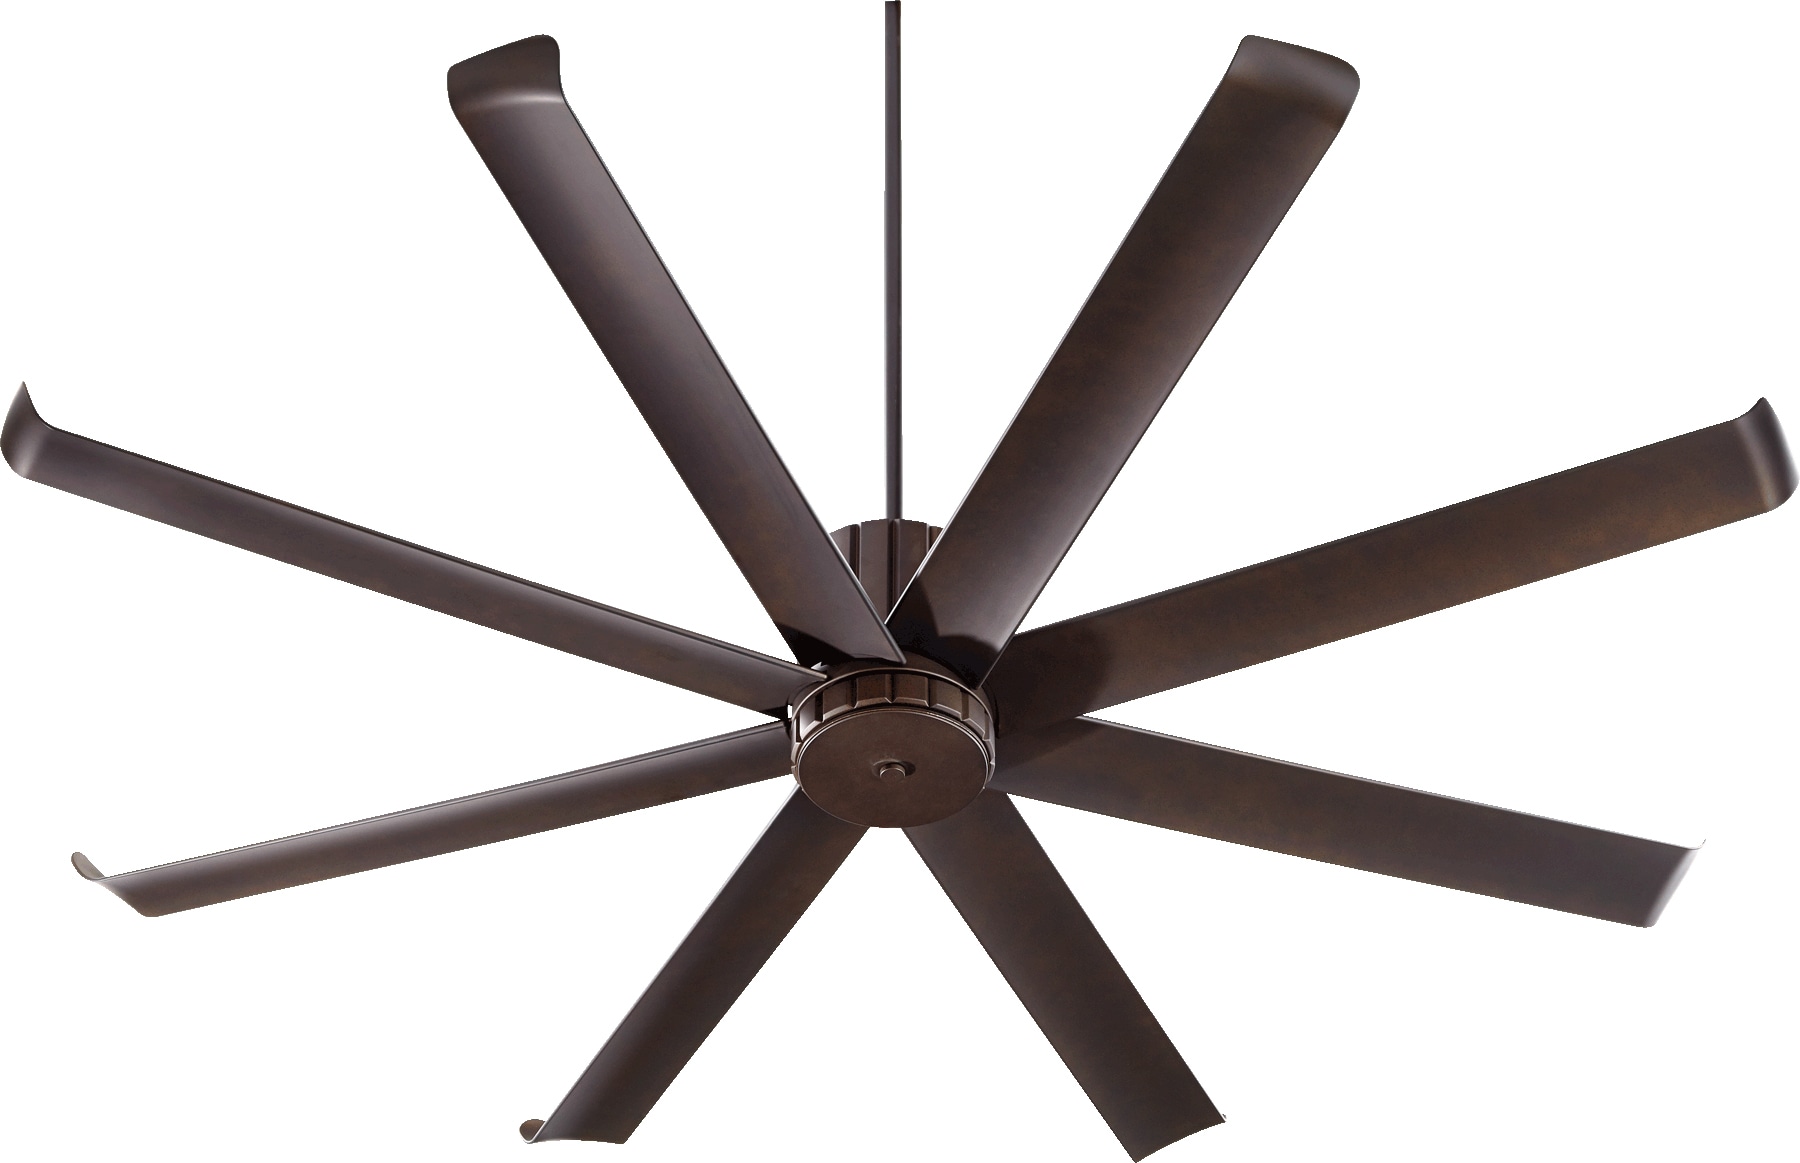 Proxima Patio 72-in Oiled Bronze Indoor/Outdoor Ceiling Fan Wall-mounted with Remote (8-Blade) | - Quorum International 196728-86